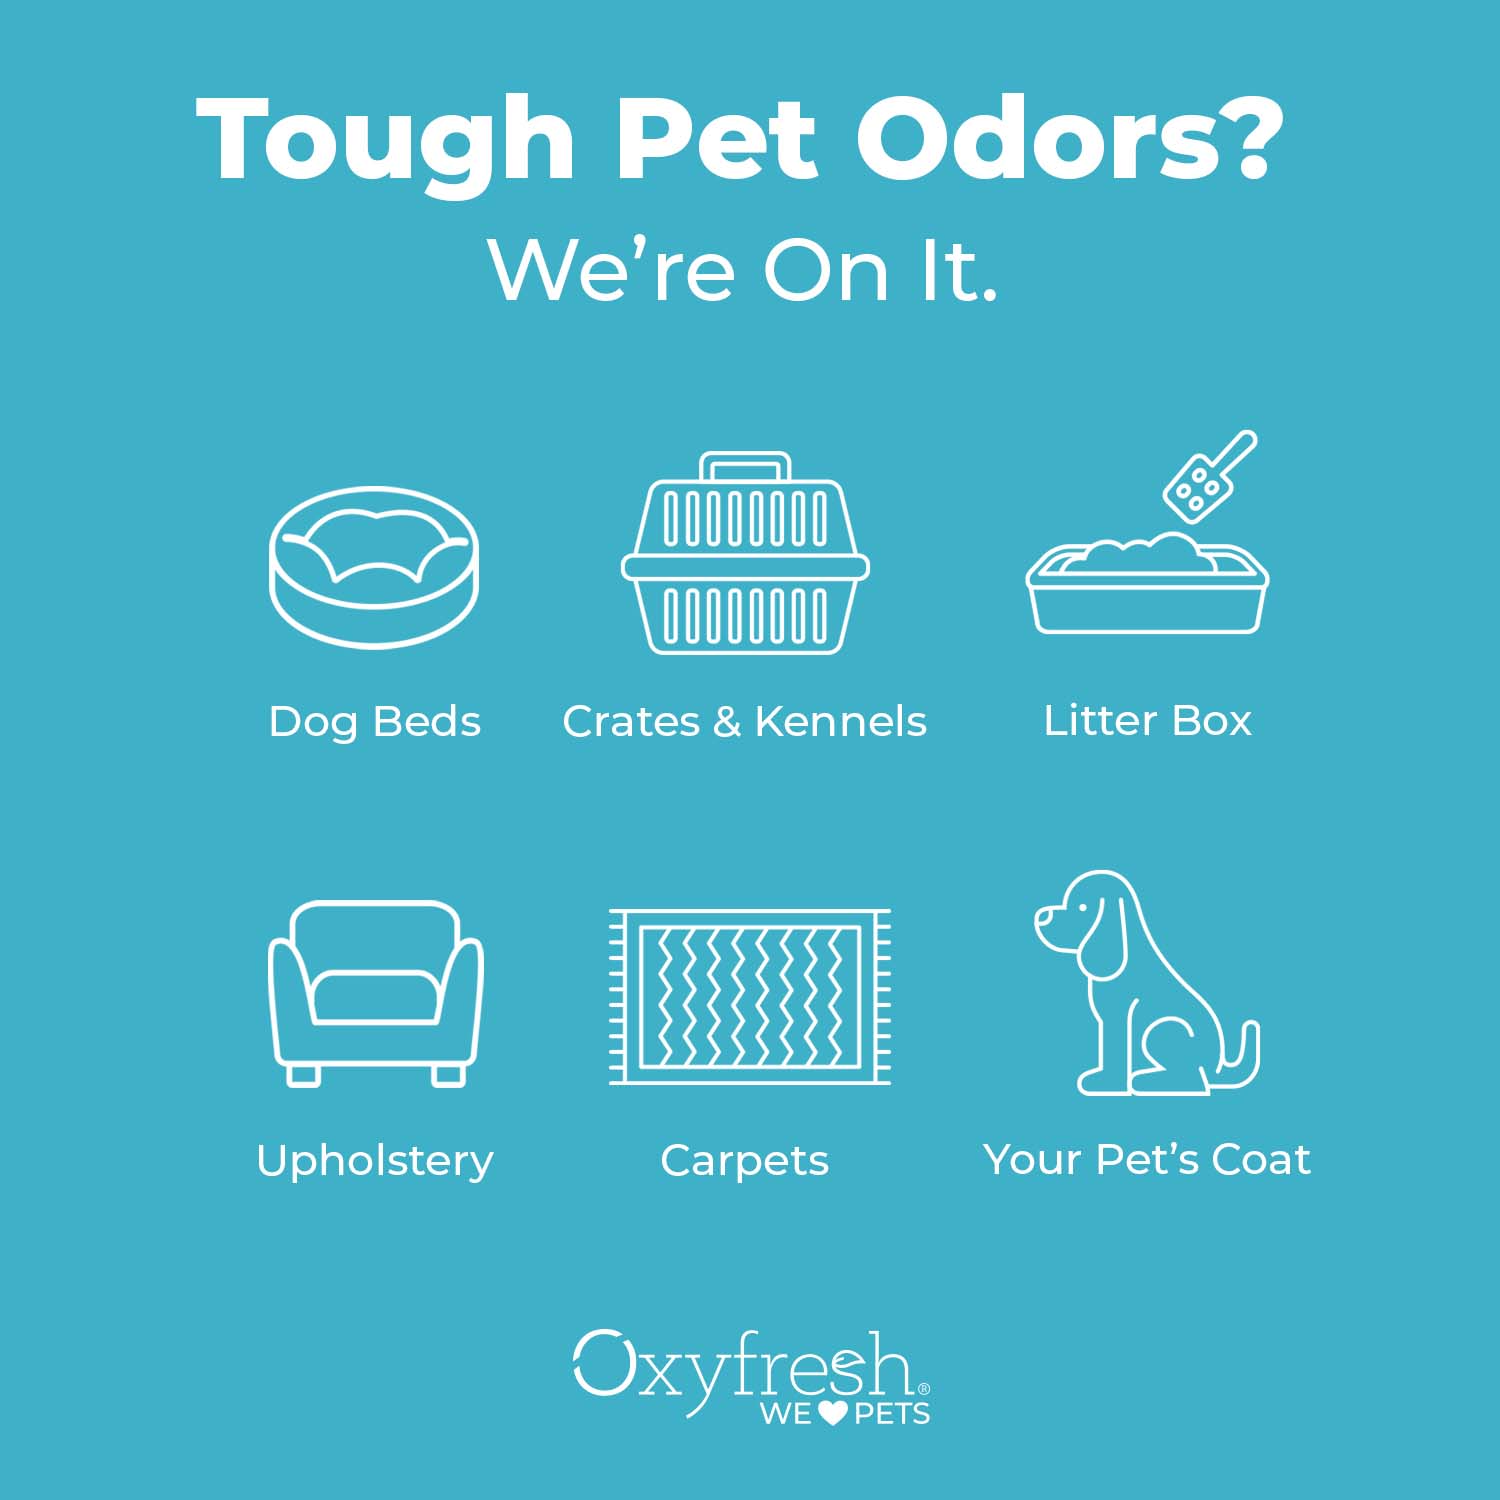 oxyfresh-advanced-pet-deodorizer-spray-is-tough-on-pet-odors-in-dog-beds-crates-and-kennels-litter-boxes-upholstery-carpets-and-your-pet's-coat